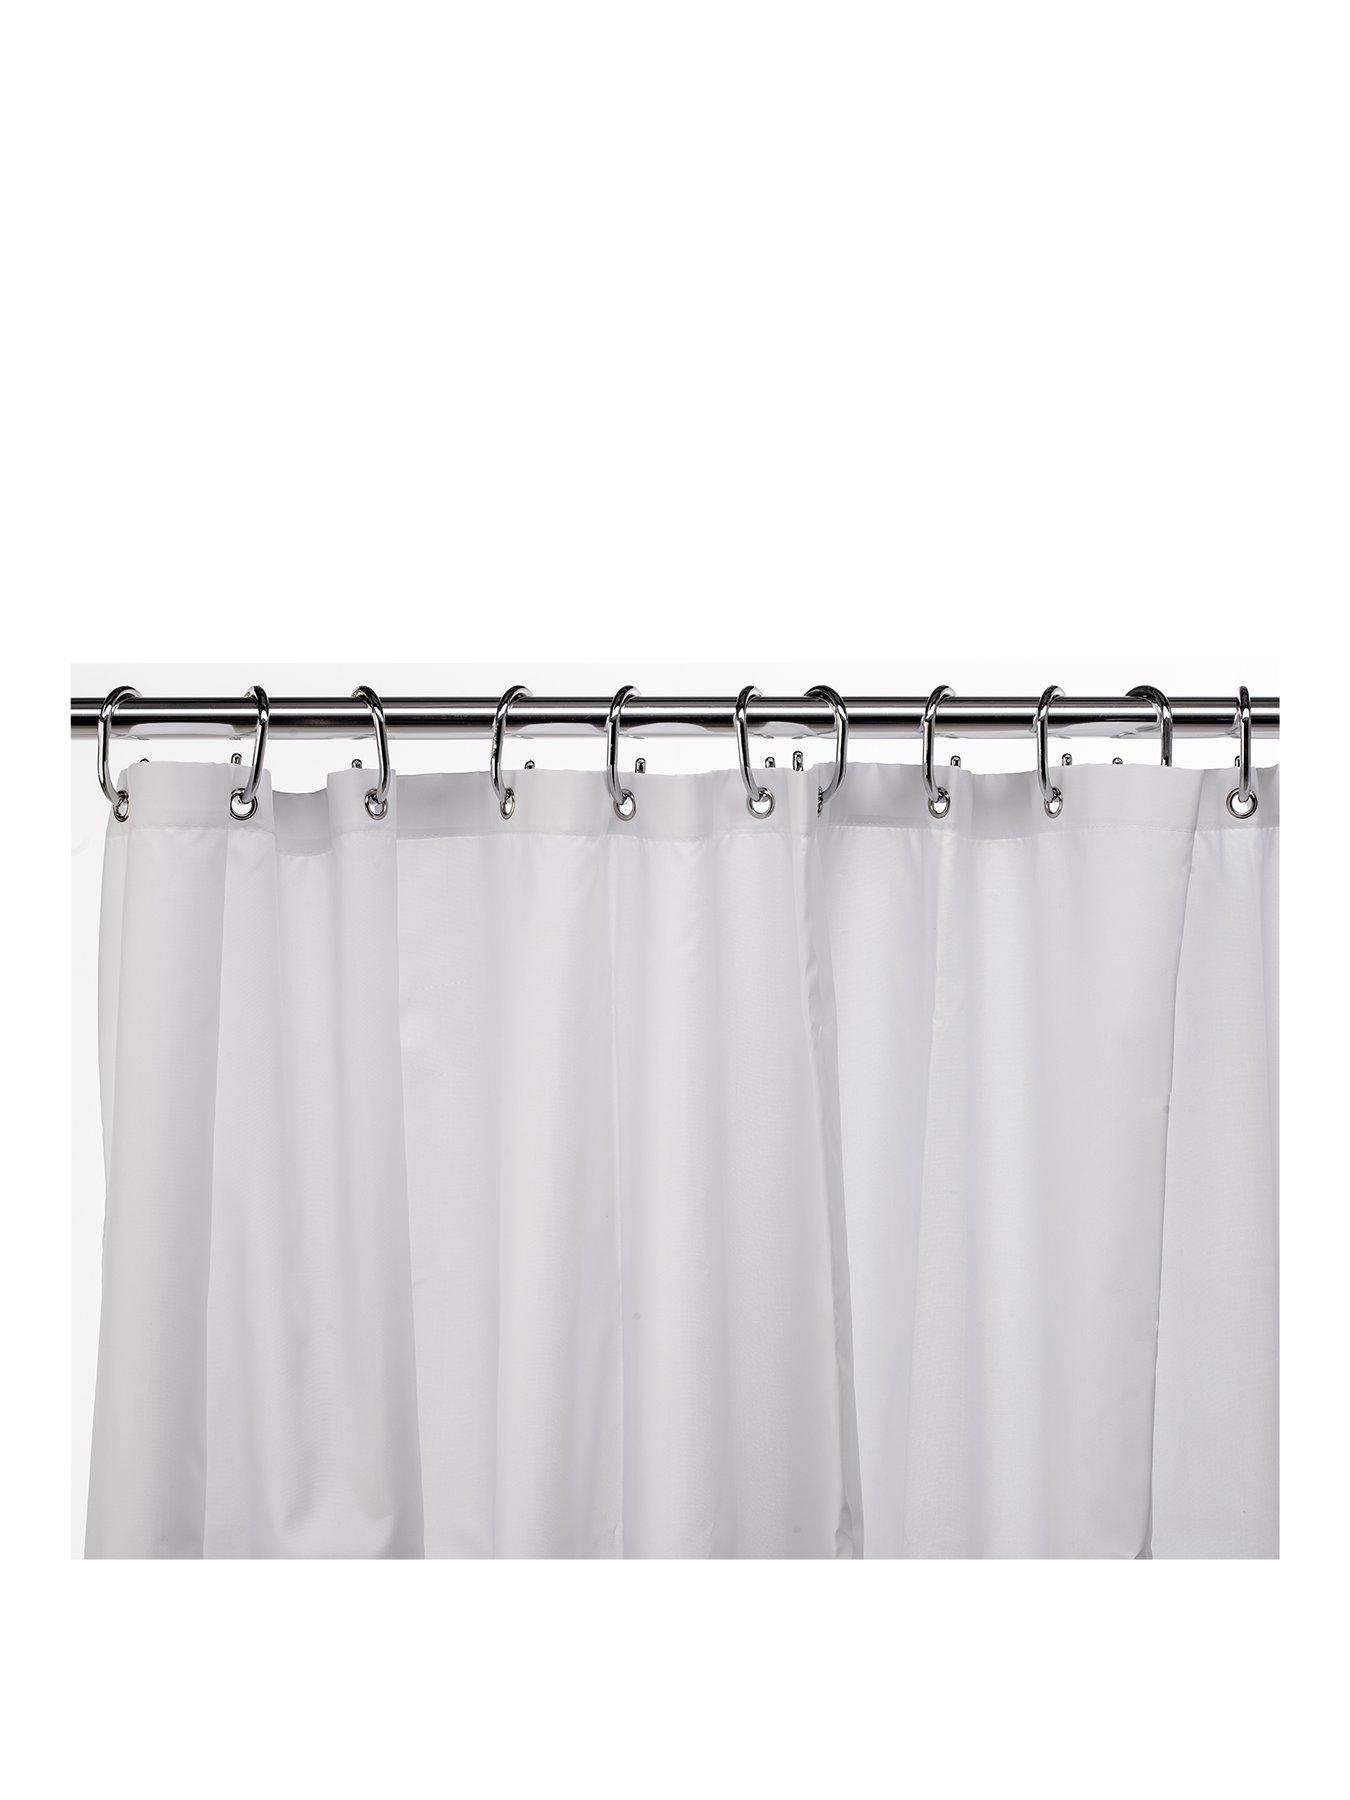 Details about   Pure Color Thick Shower Curtain Bathroom Waterproof PEVA Shower Curtain 